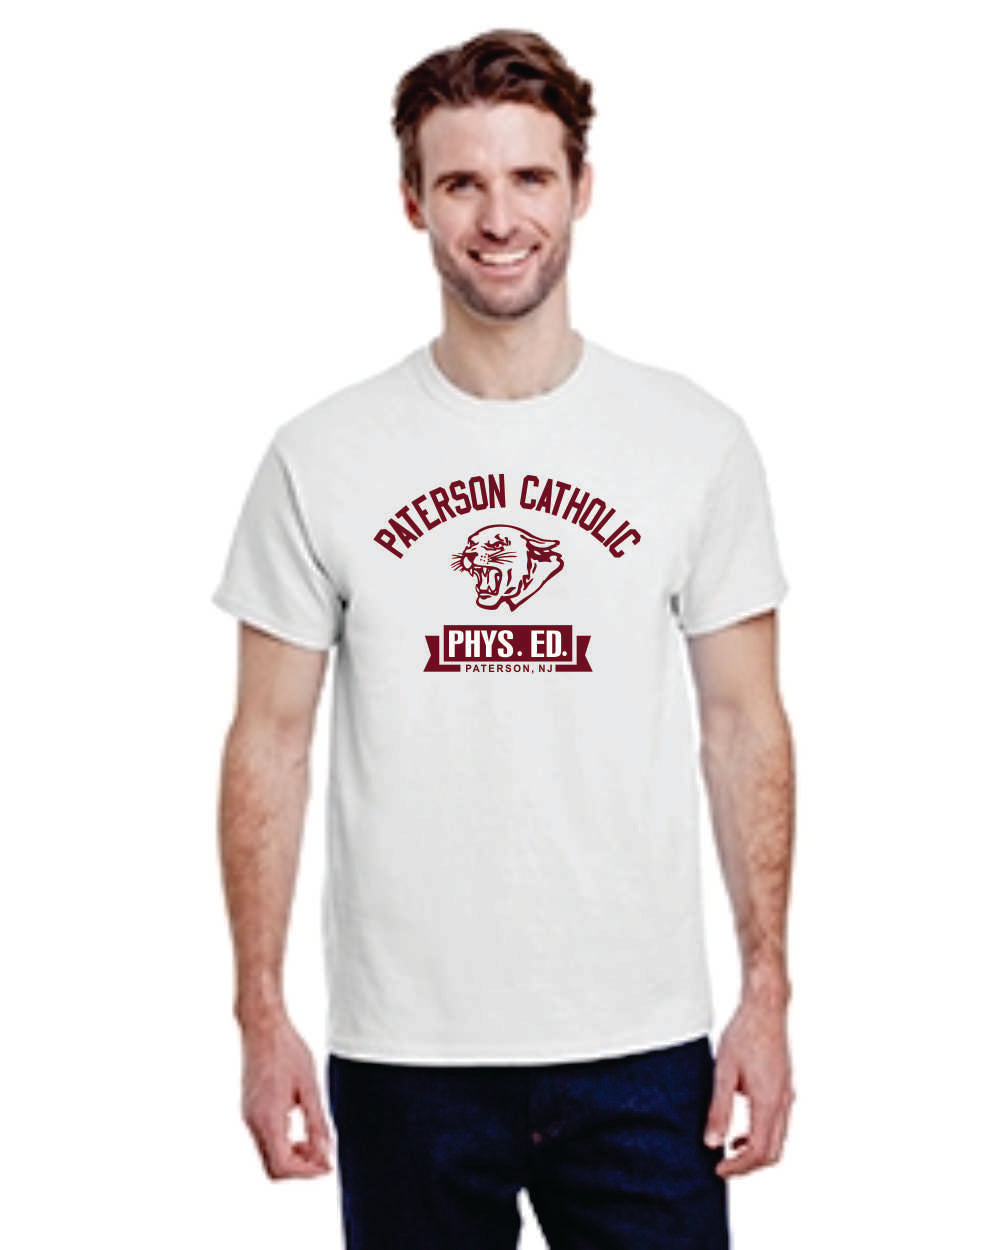 Paterson Catholic, Paterson, NJ COUGARS, T-SHIRT FREE SHIPPING in USA